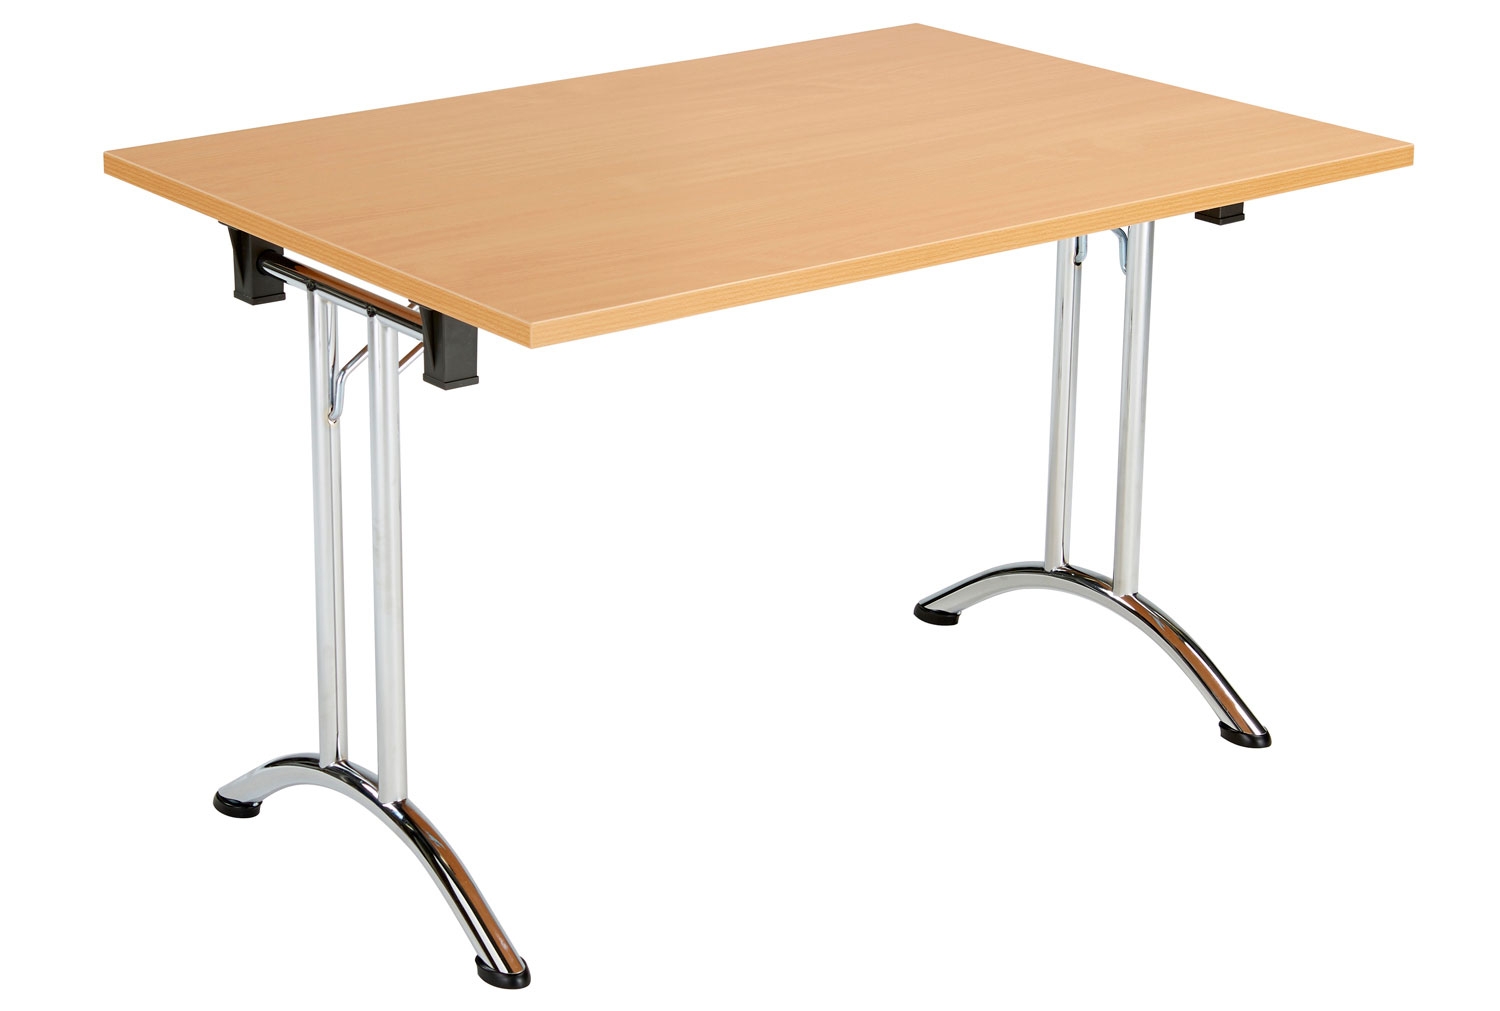 Alliance Rectangular Folding Table, 160wx80dx73h (cm), Beech, Express Delivery